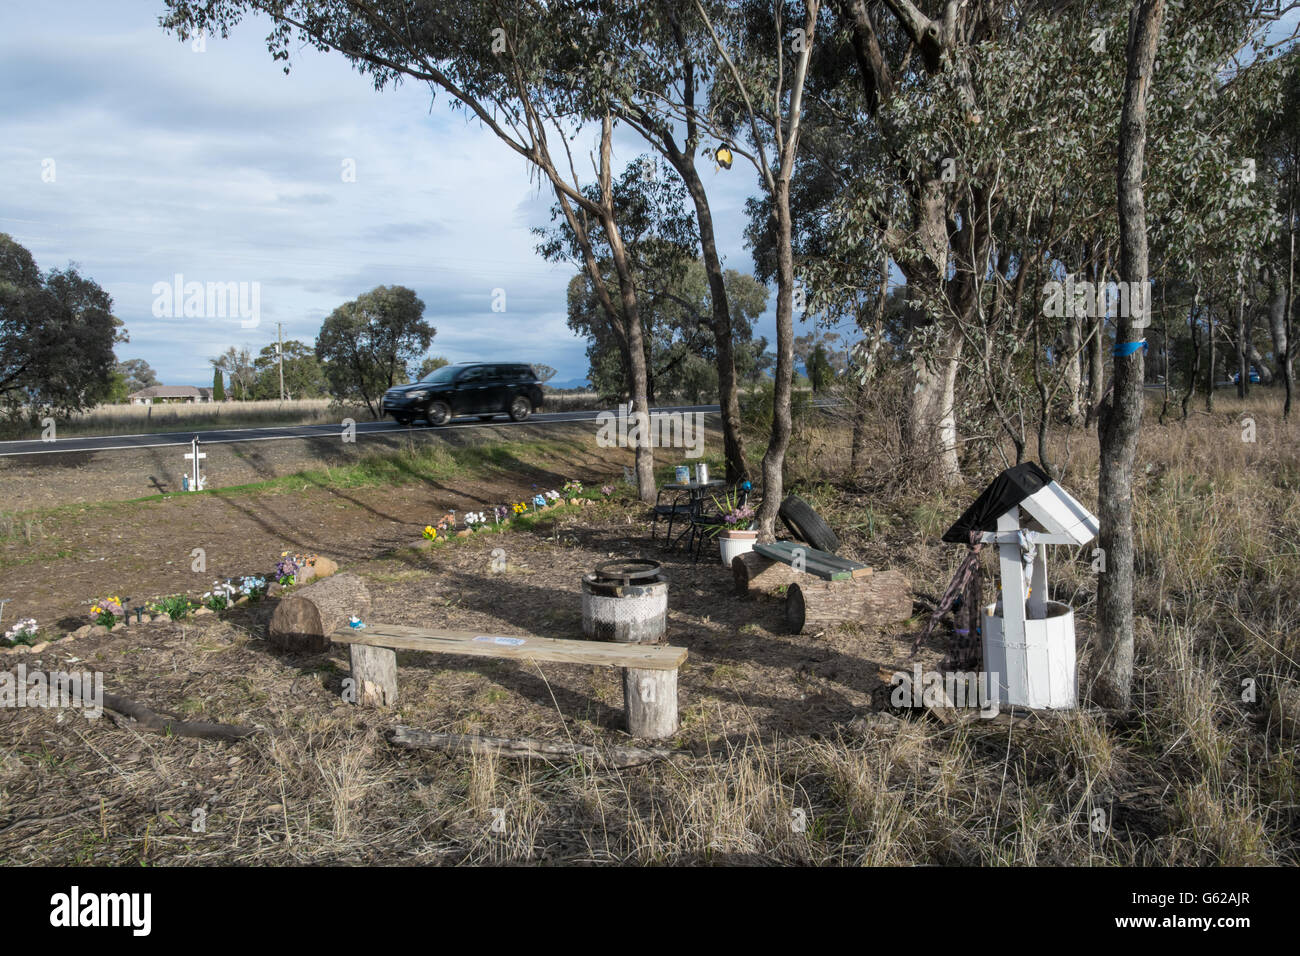 Roadside Memorial with barbecue,seating and a wishing well in rural NSW Australia. Stock Photo